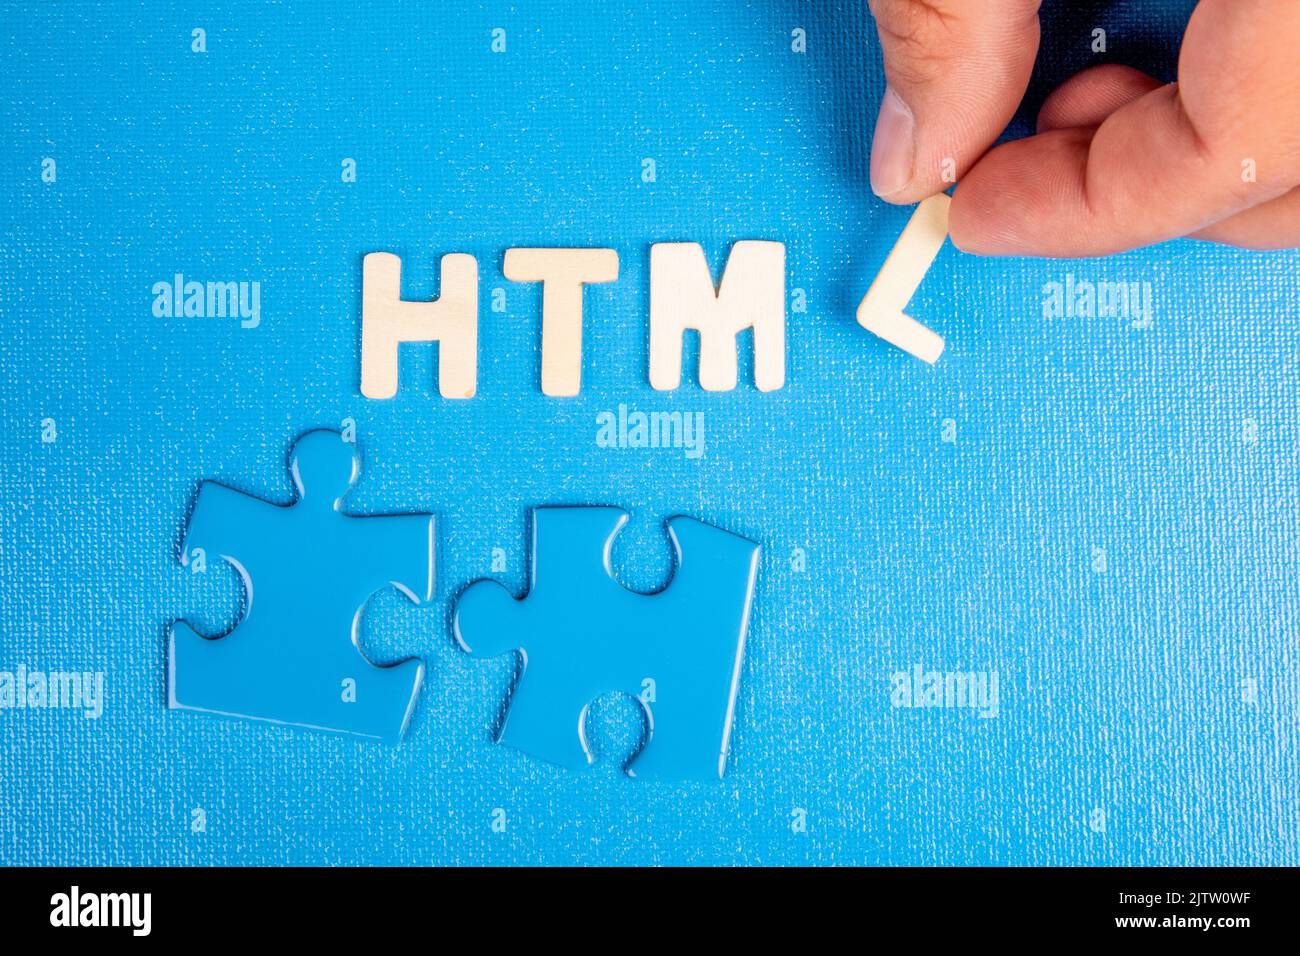 HTML. Text from white wooden letters on a blue background. Stock Photo